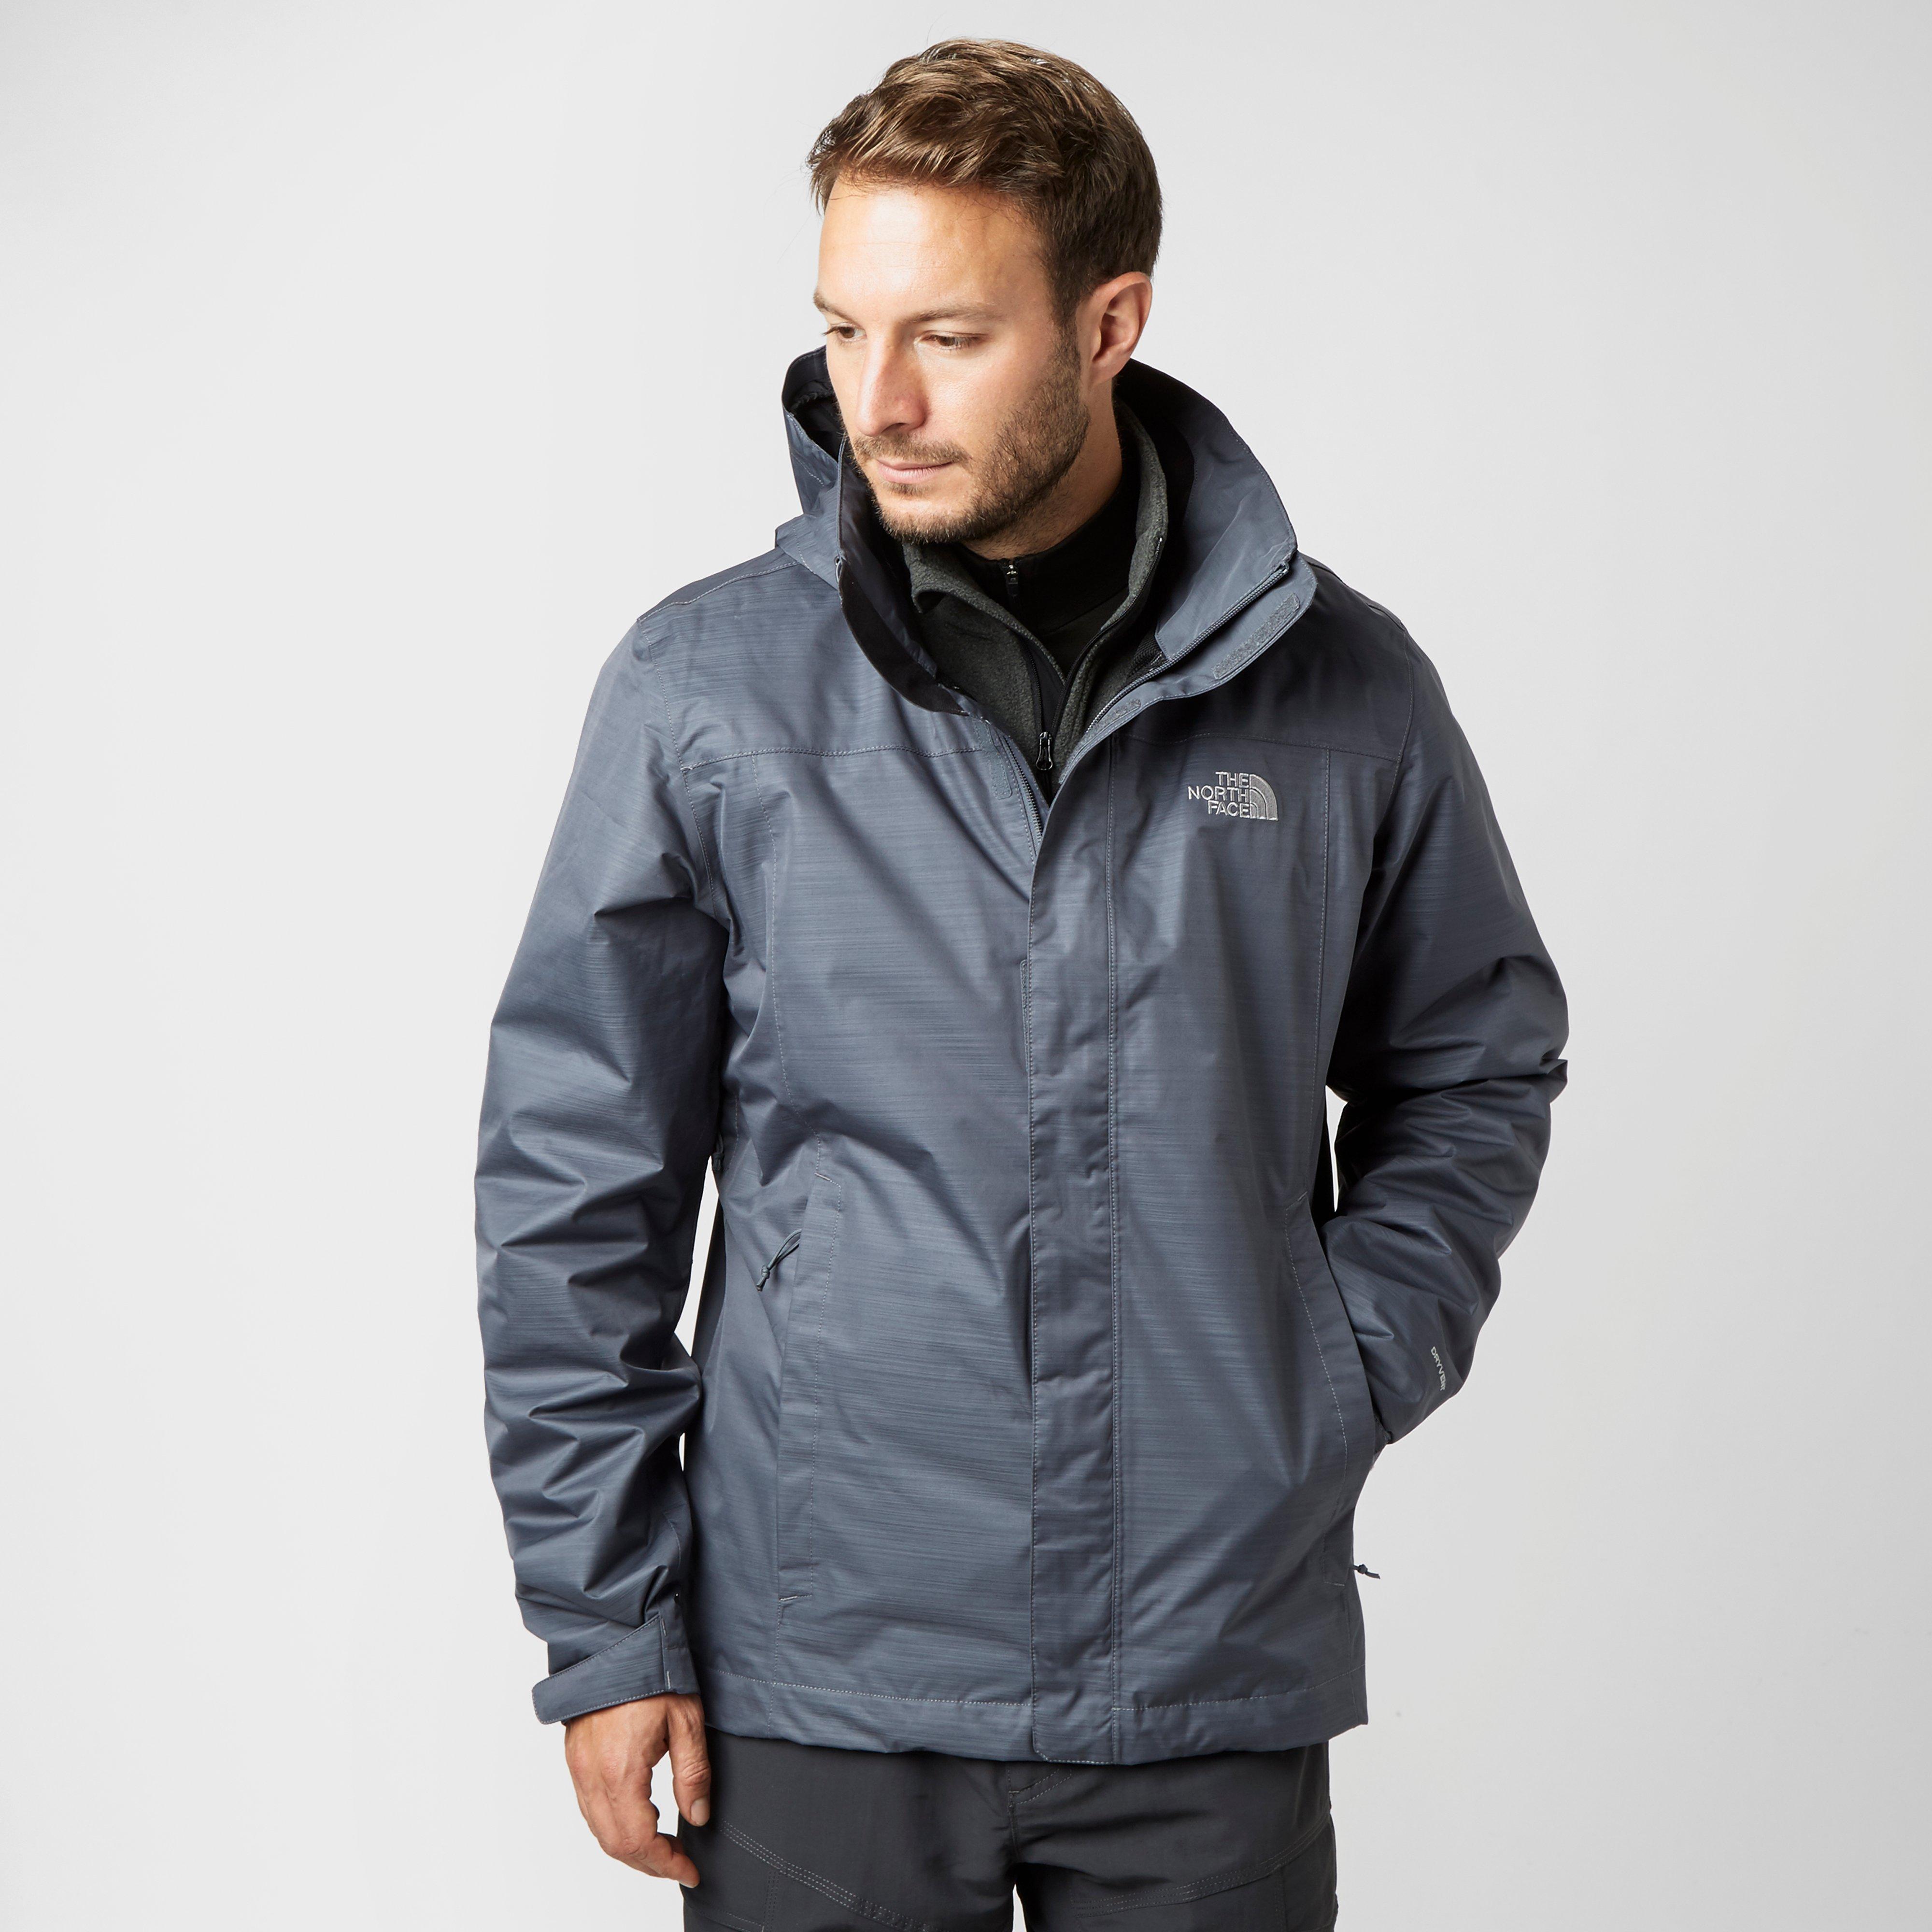 north face jackets with hood for men